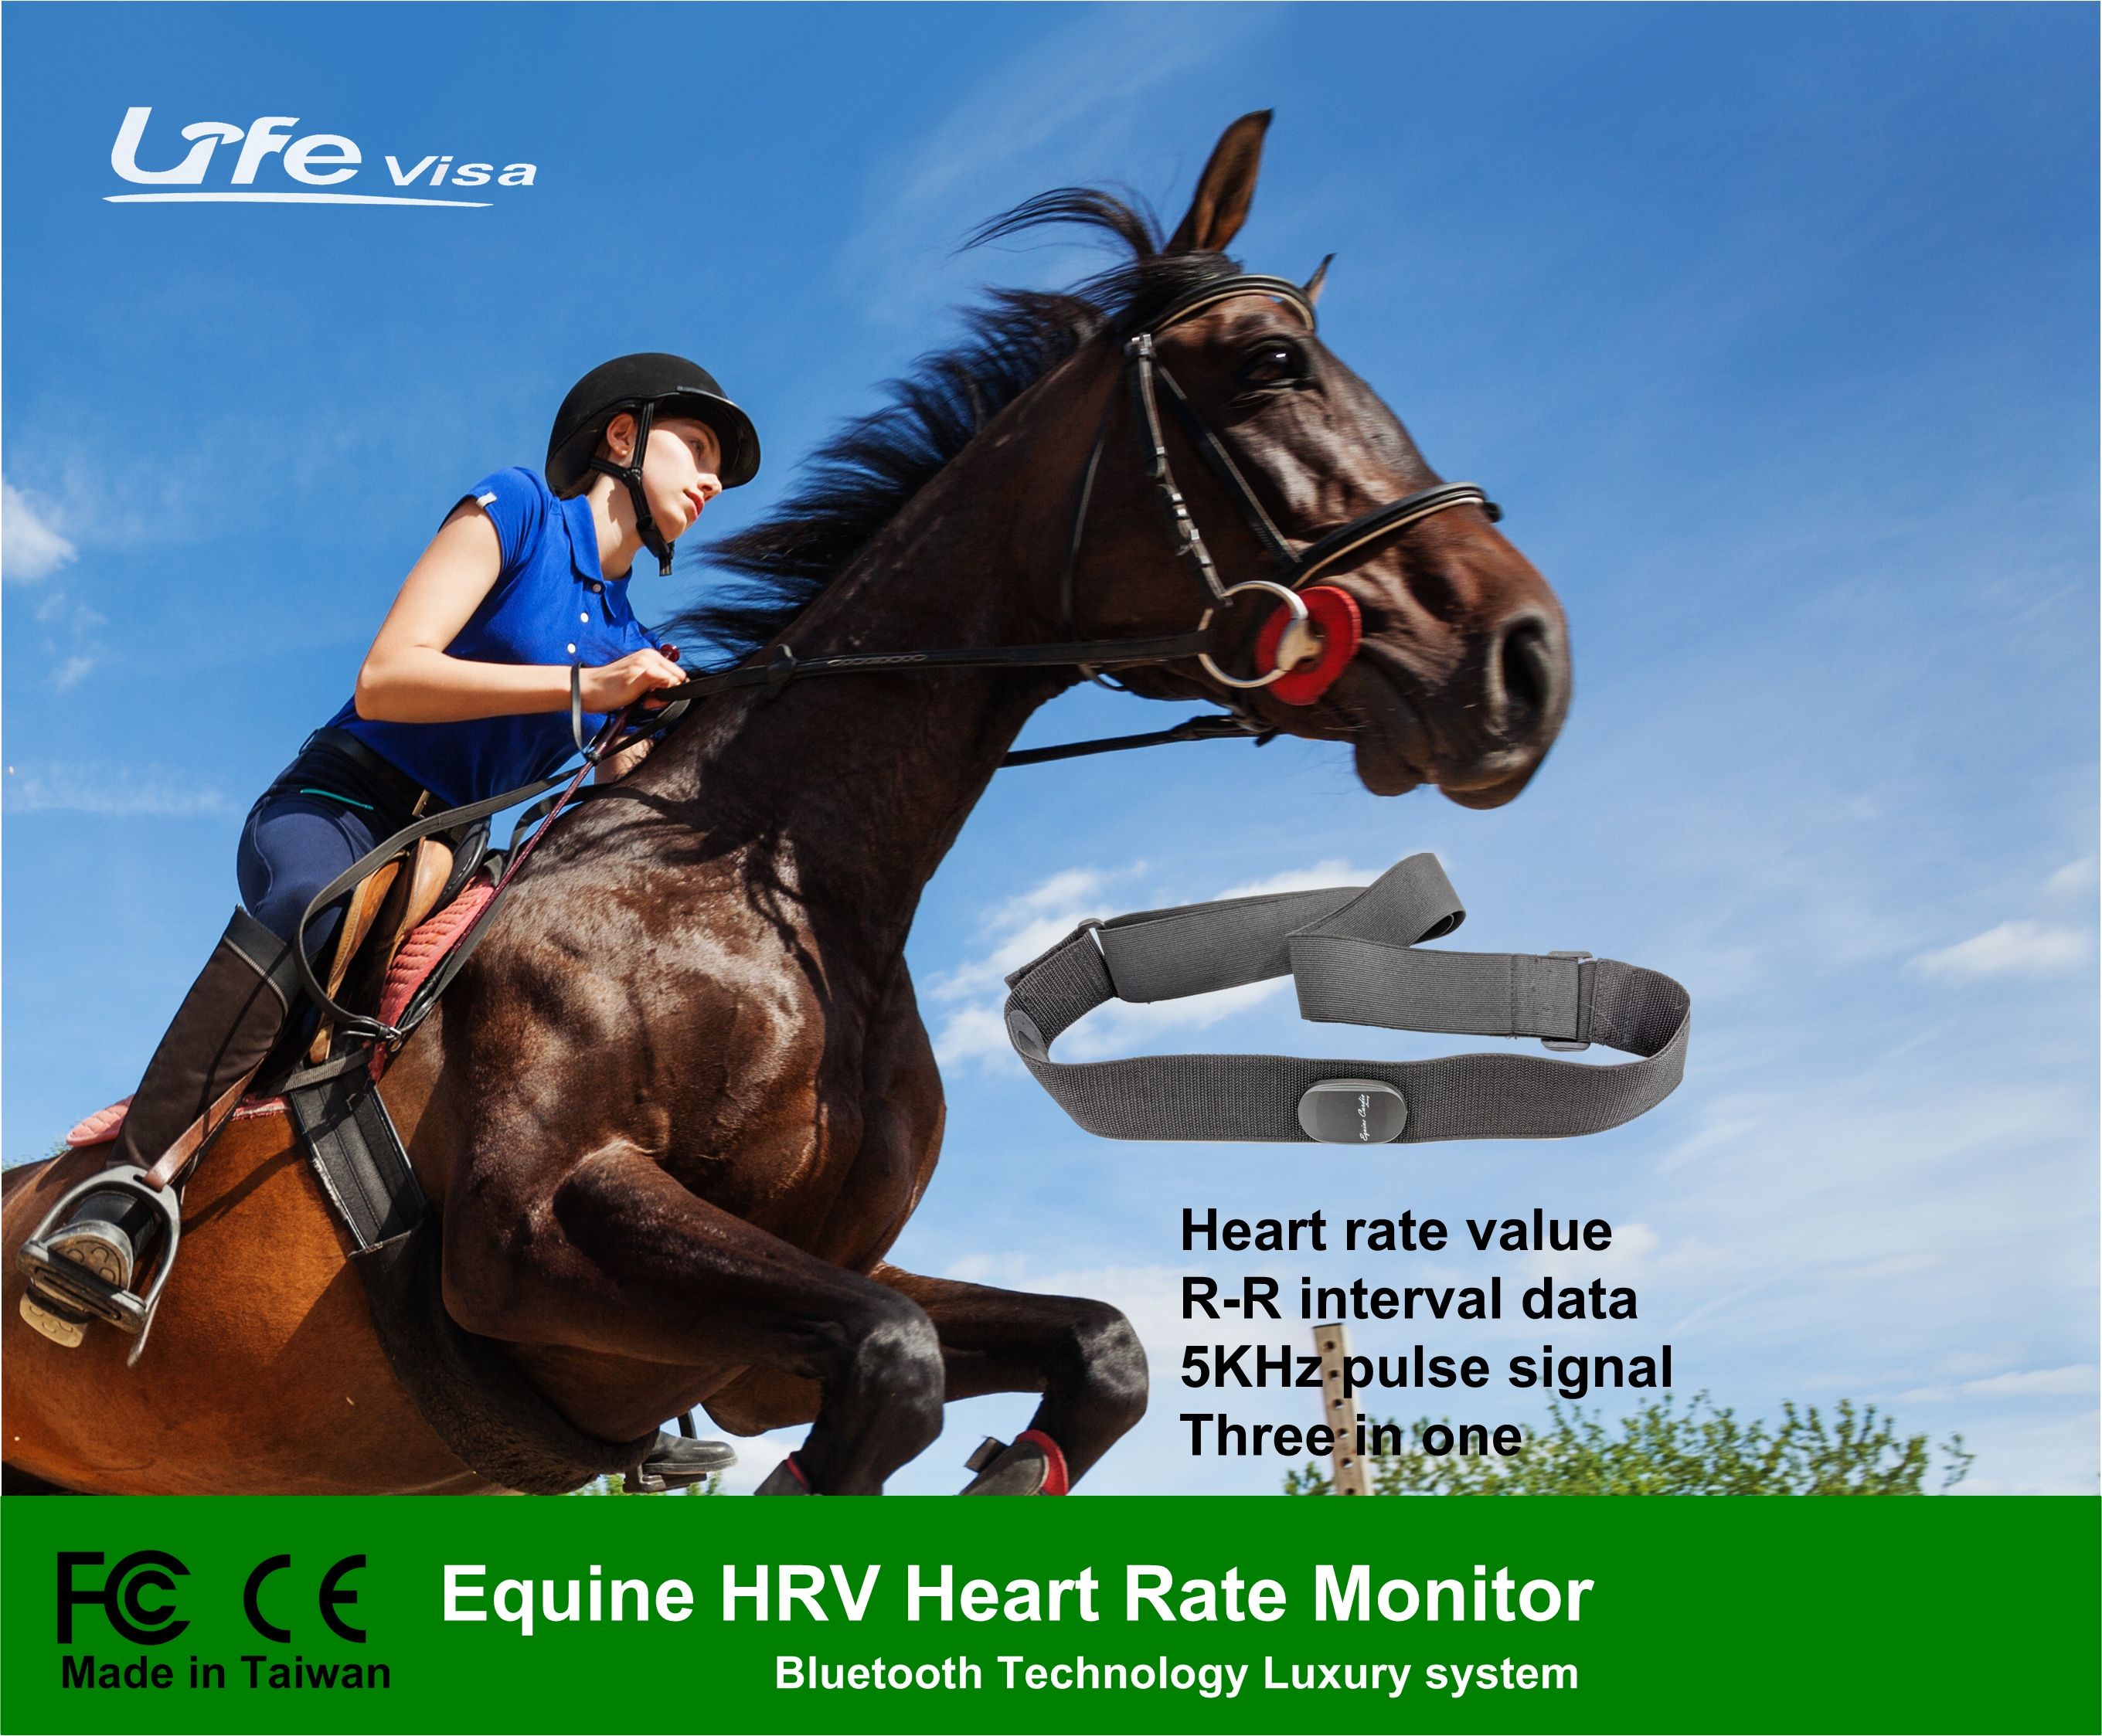 LIFEVISA EQUINE HEART RATE MONITOR LUXURY SYSTEM